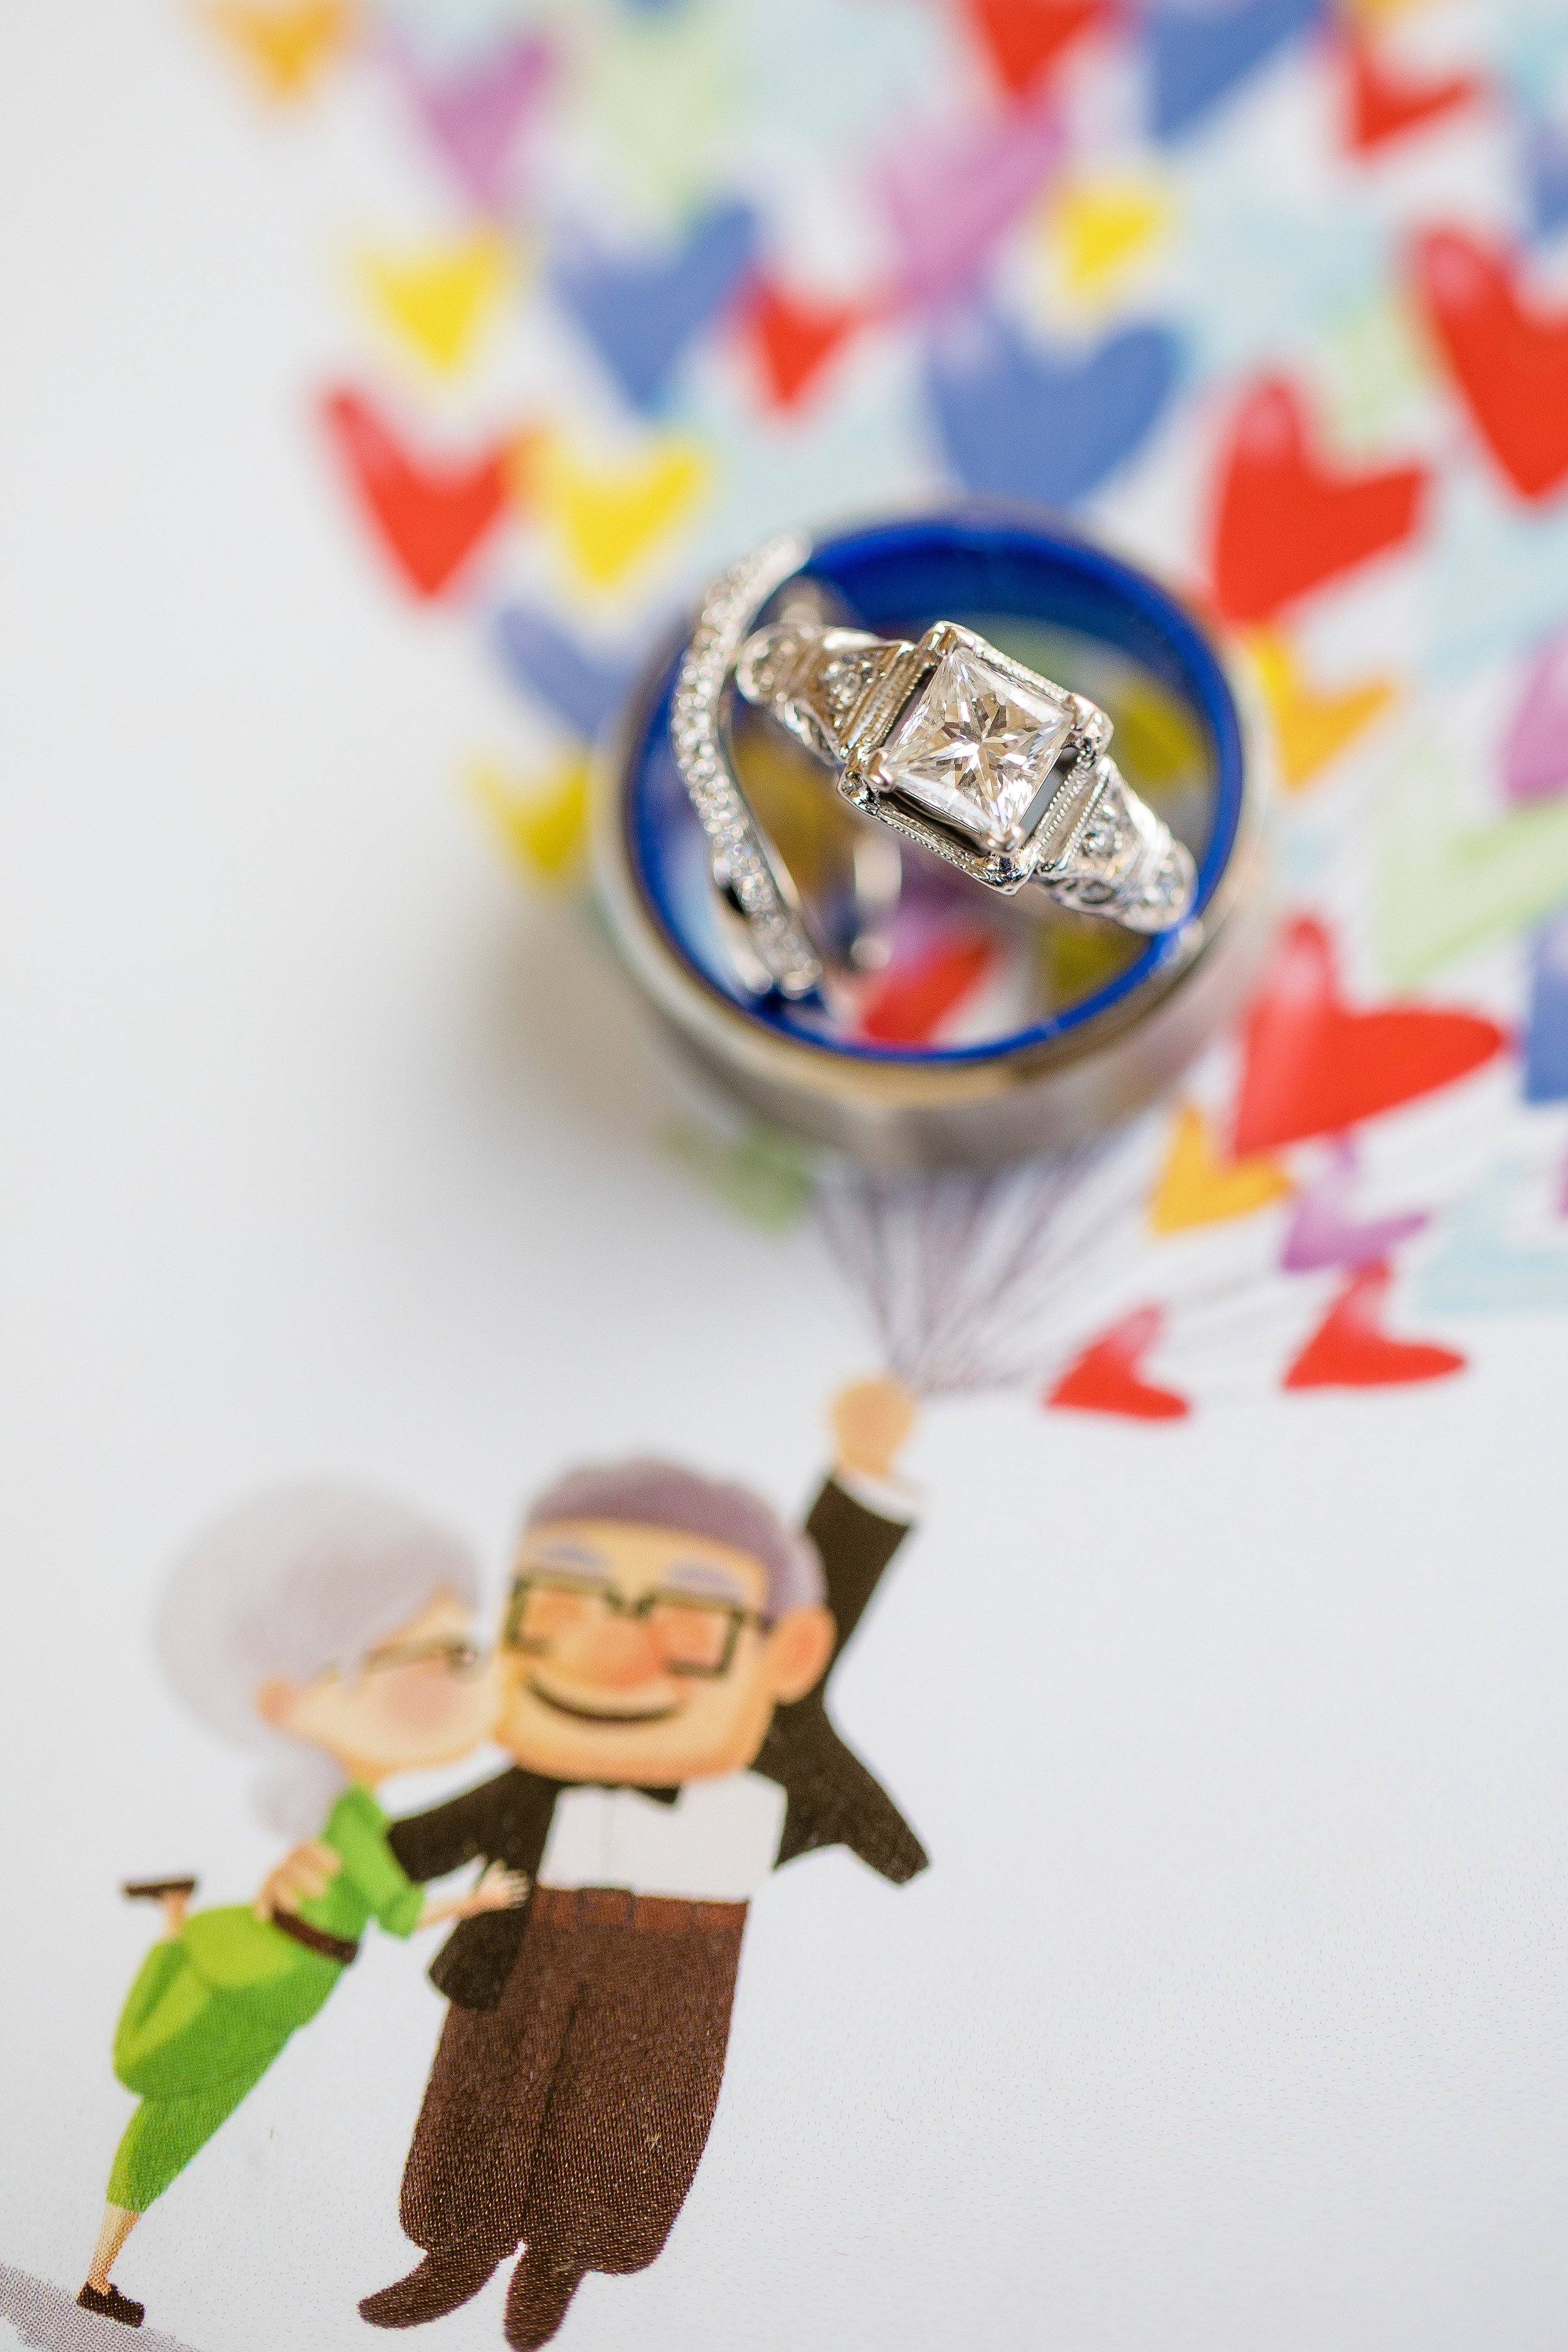  I love Disney Pixar’s “Up” - Matt &amp; Maria’s “Up” themed wedding day was so much fun to photograph! I got to get a little creative with their details, too! 